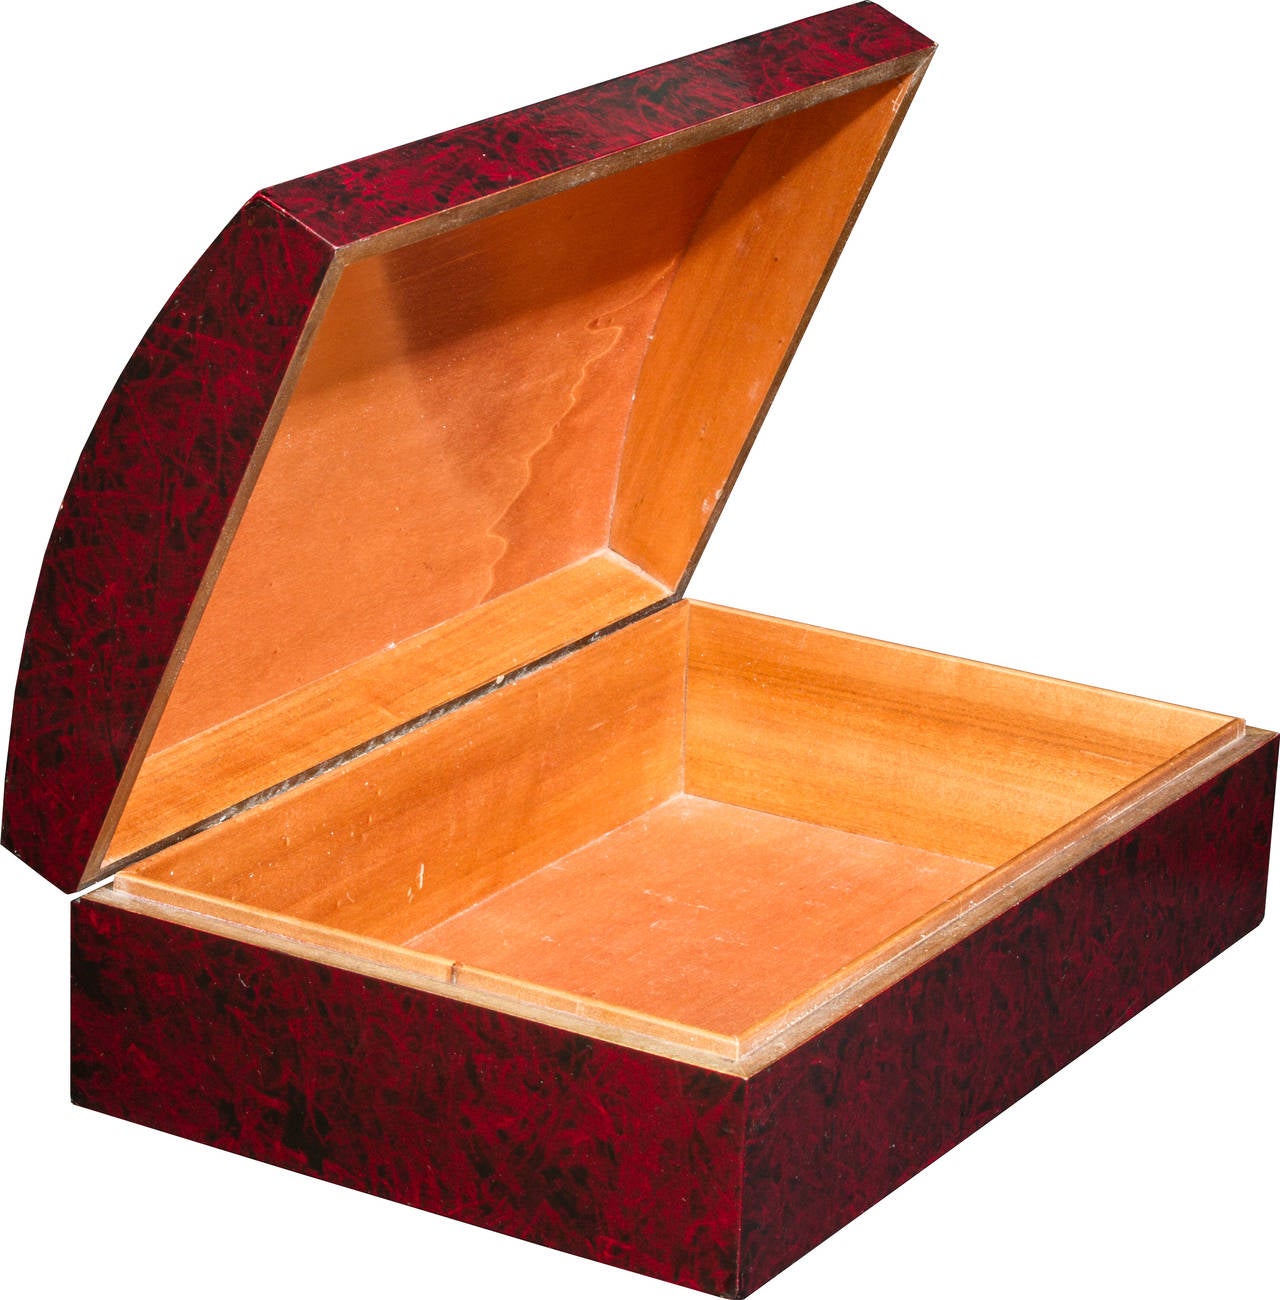 This is nice lacquered box with a gold chain motif.